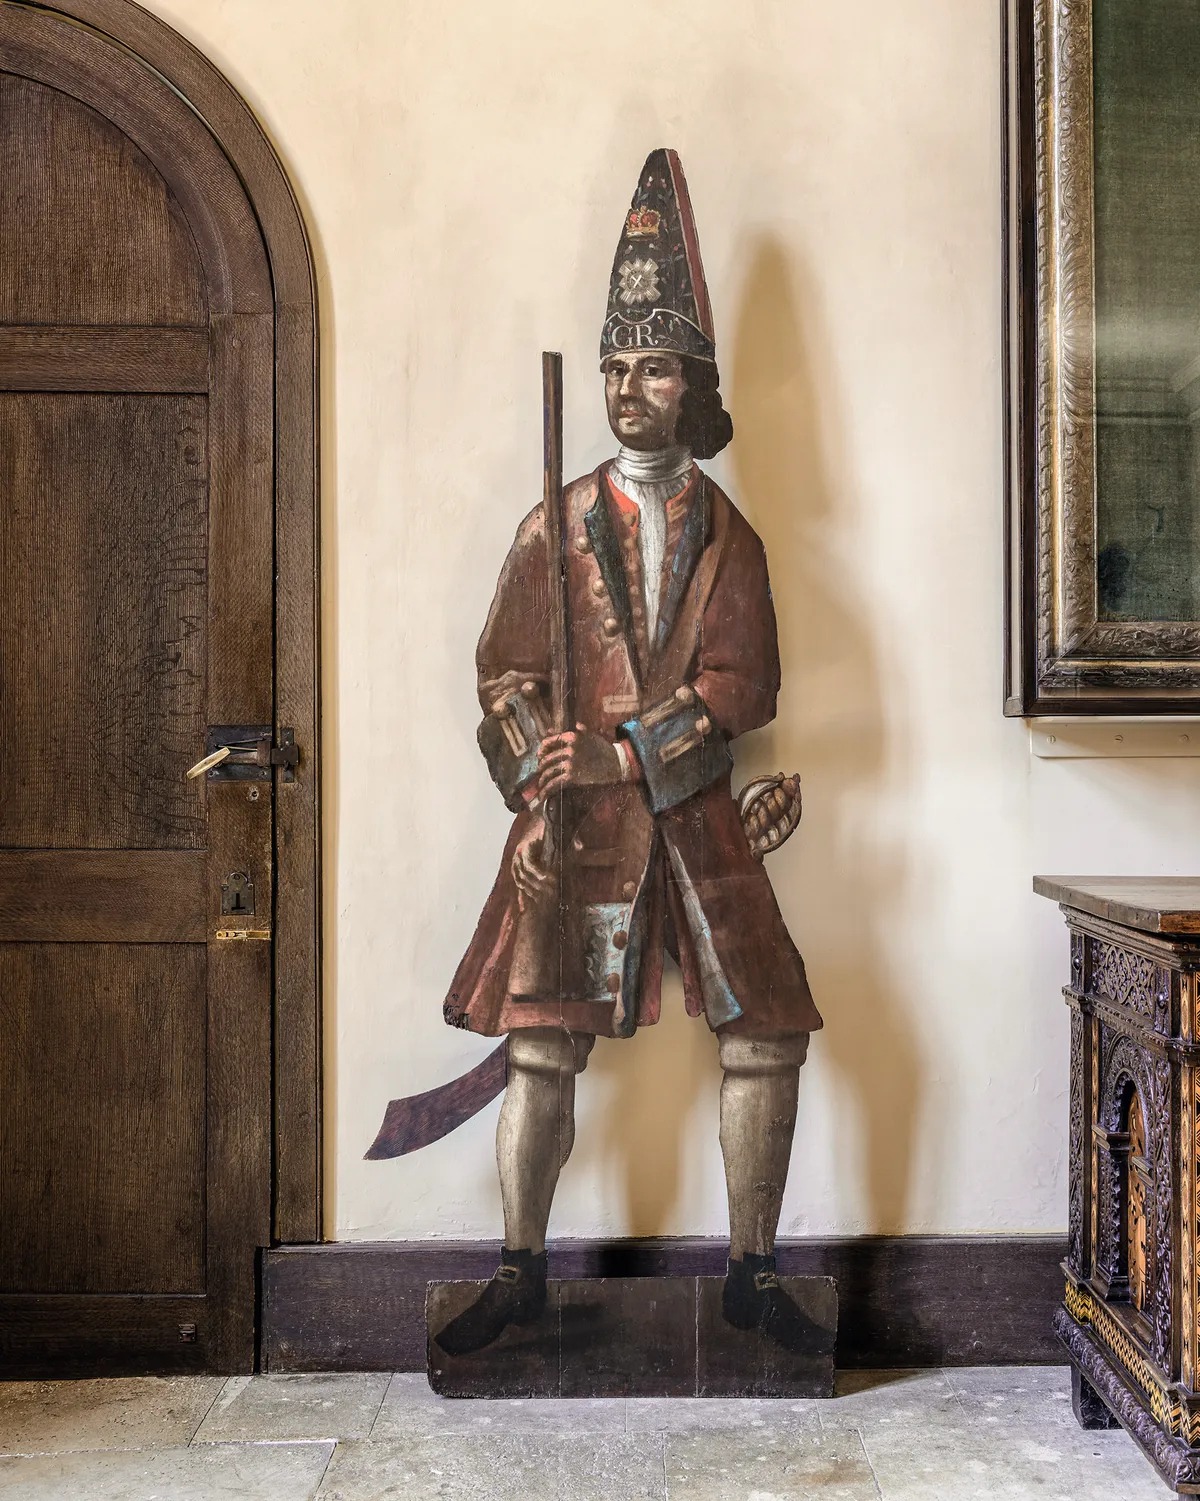 A Scots Guardsman in the Great Hall at Canons Ashby, Northamptonshire, which was painted by Elizabeth Creed between 1715 and 1717. © National Trust/Lynda Aiano